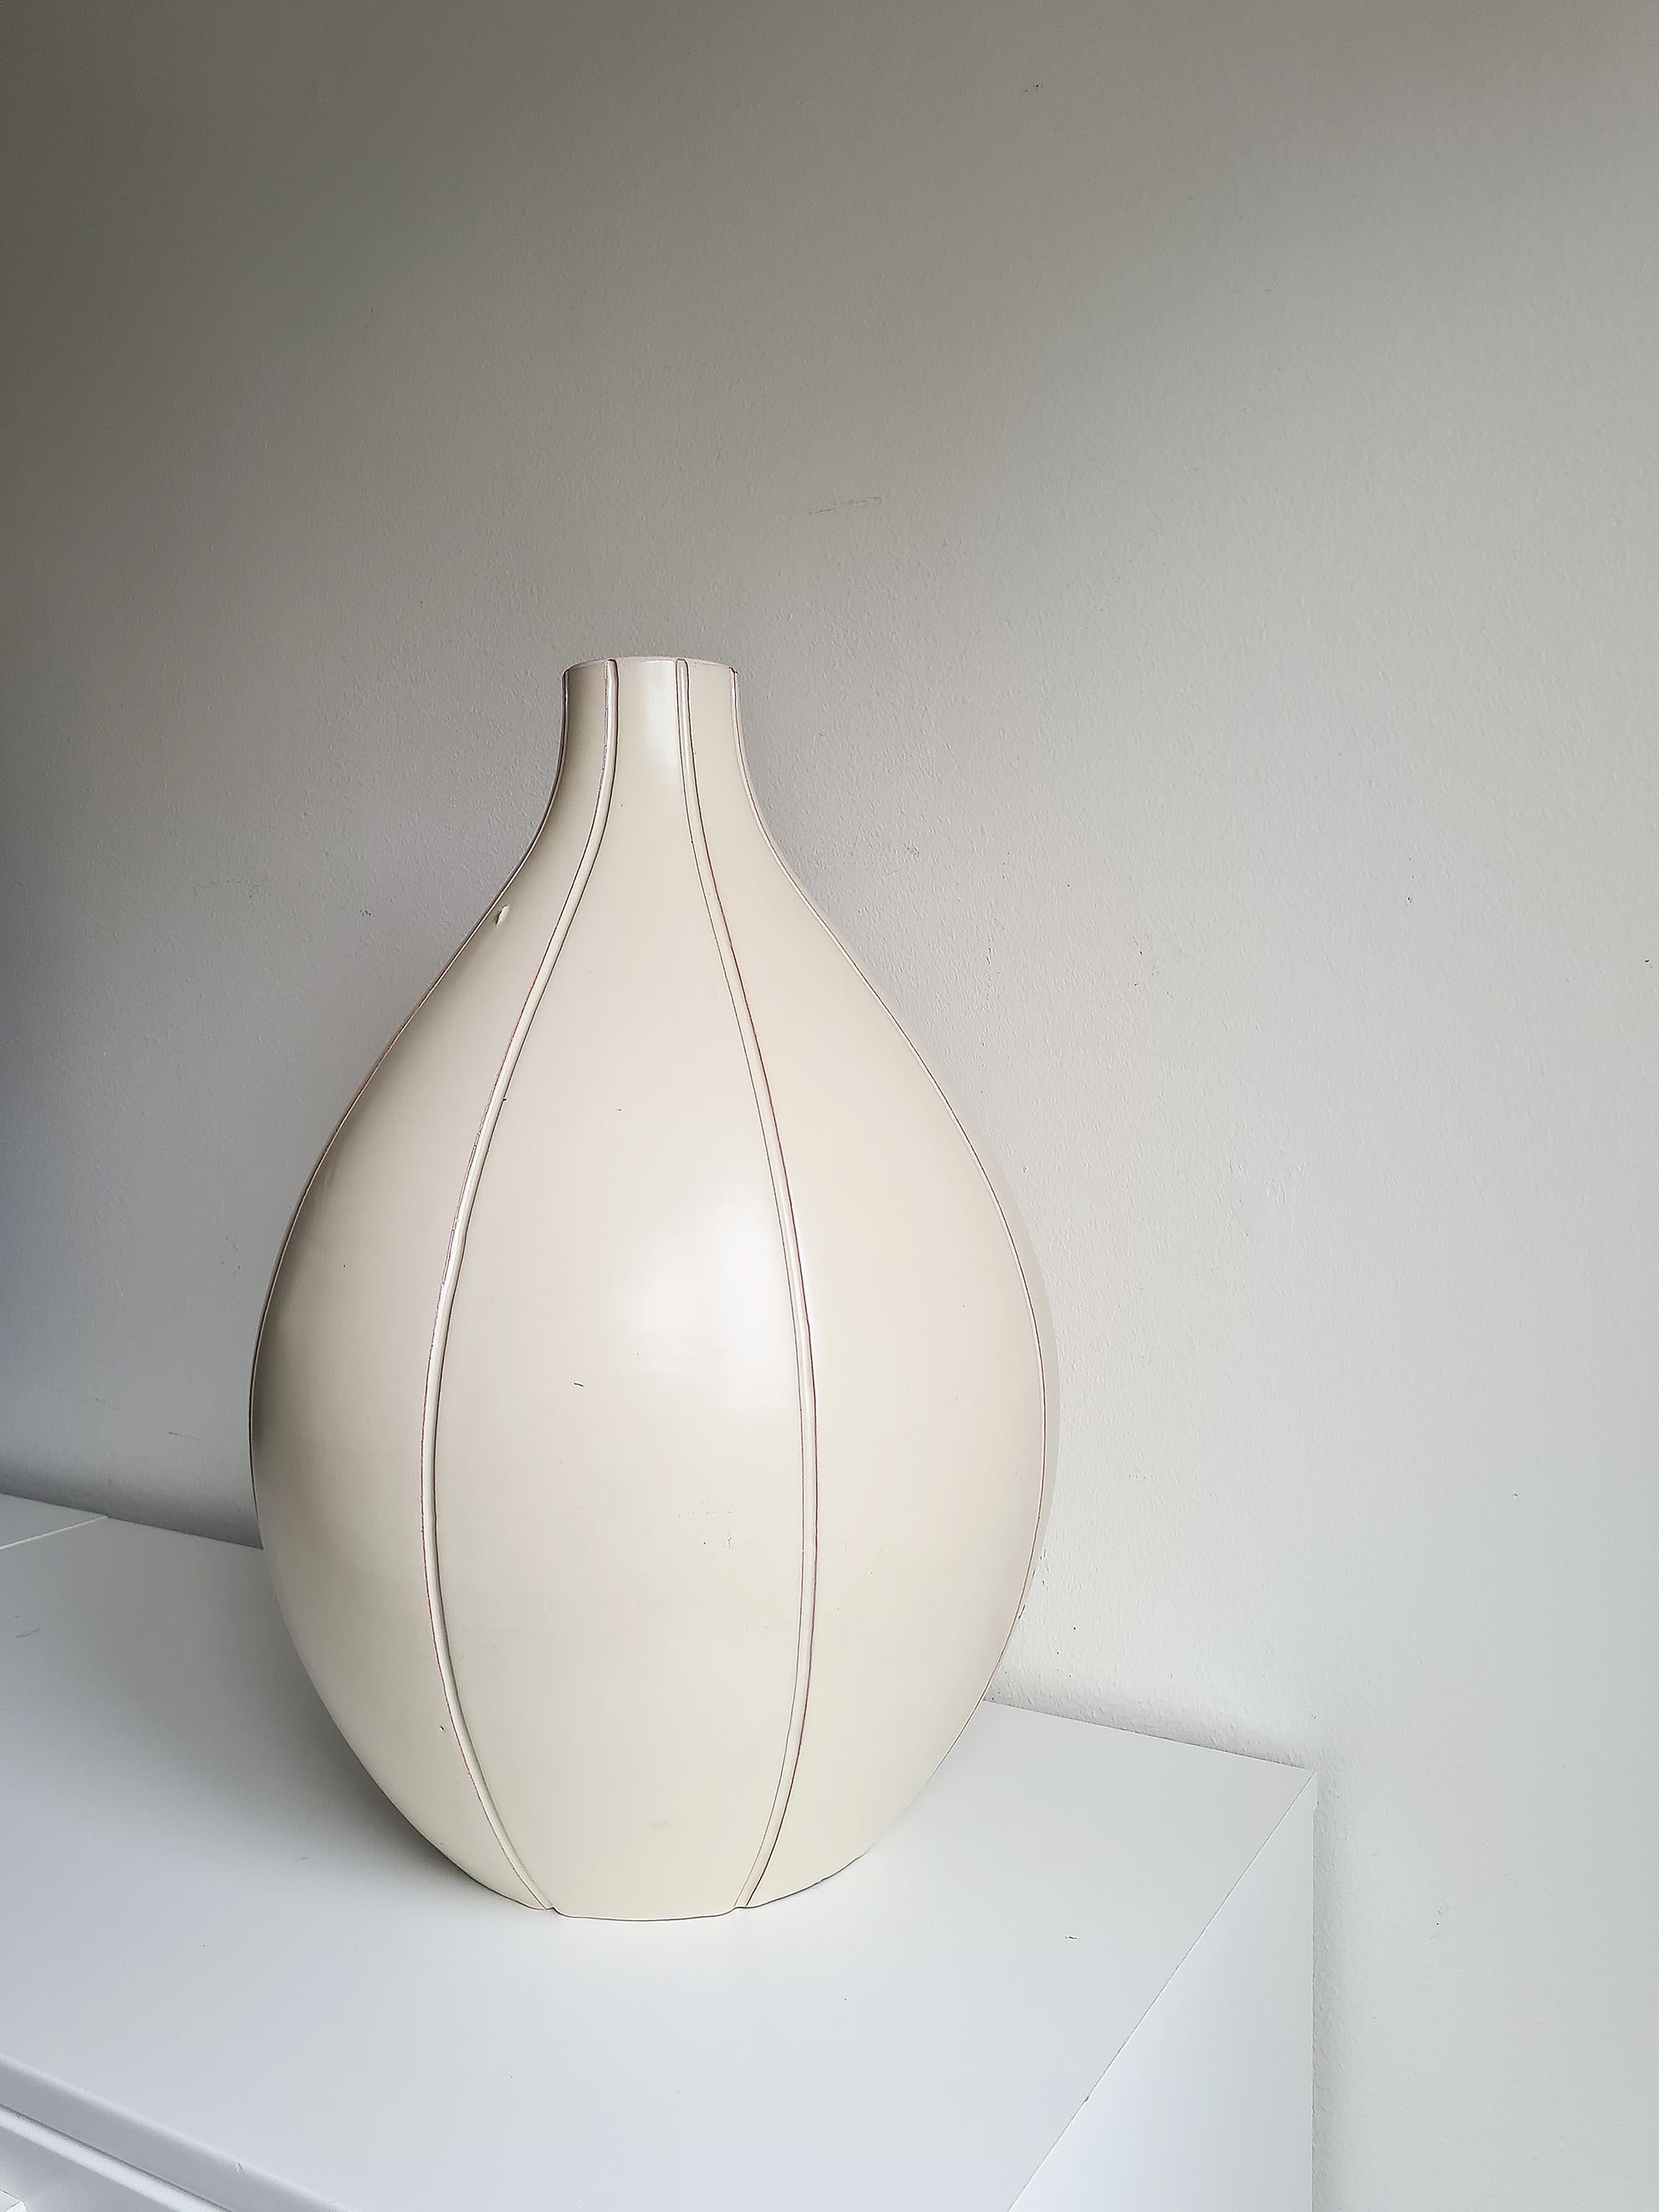 Rare and cool floor vase by Erik Ivarsson for Andersson & Johansson/Höganäs Keramik -40's.
Wear consistent with age and use, glaze mists, glaze crack. 
Last picture comes from Höganäs och Kullabygdens Fotoarkiv.